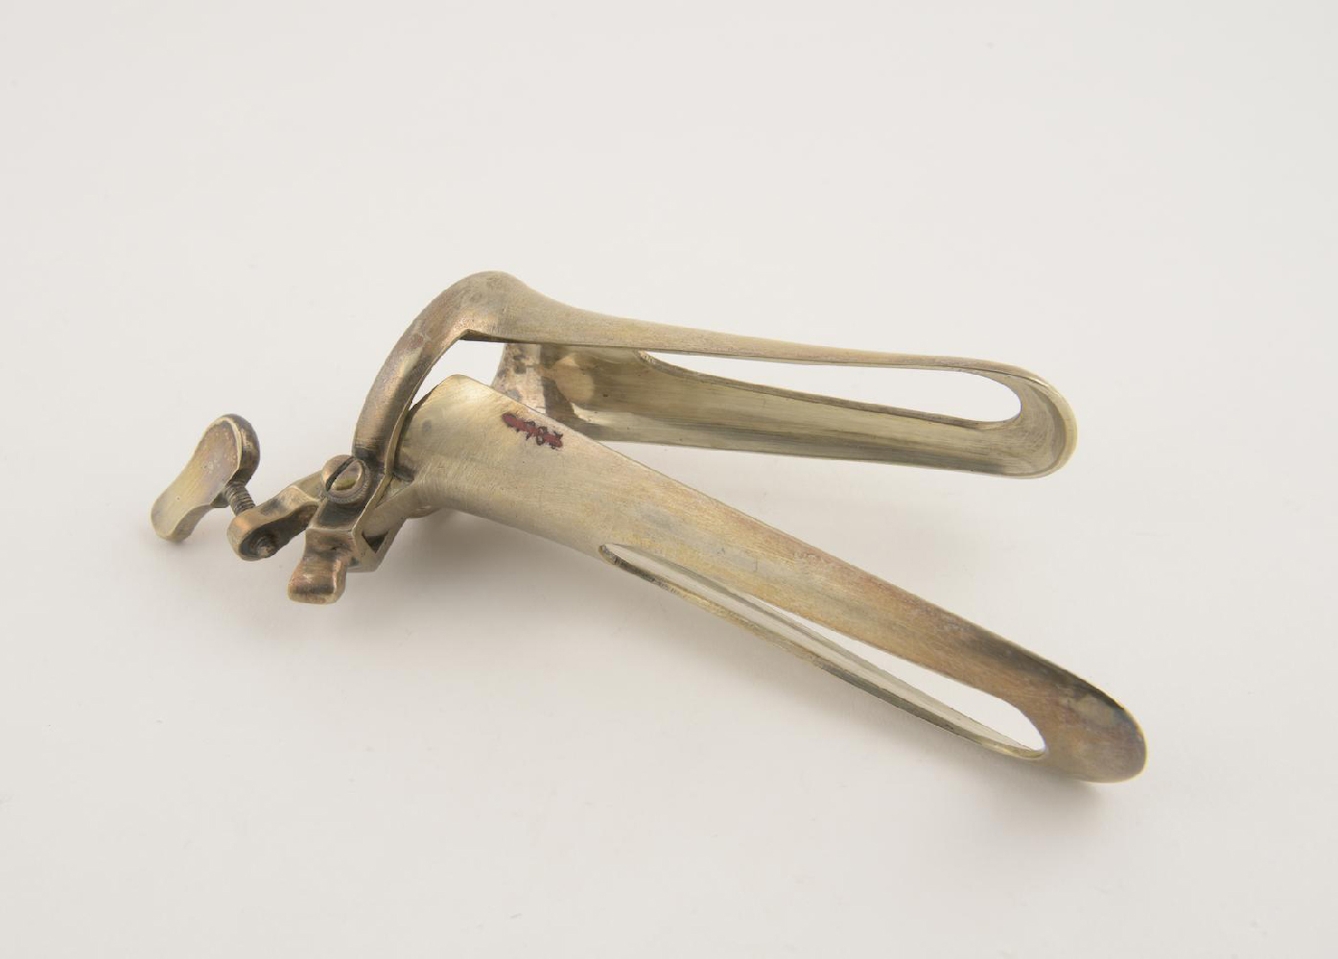 The cusco vaginal speculum, late 19th century. A silvery metal instrument consisting of two long curved parts that open and close like a duck's bill. The parts and connected at the top to a circular ring that moves them via a small screw mechanism. 